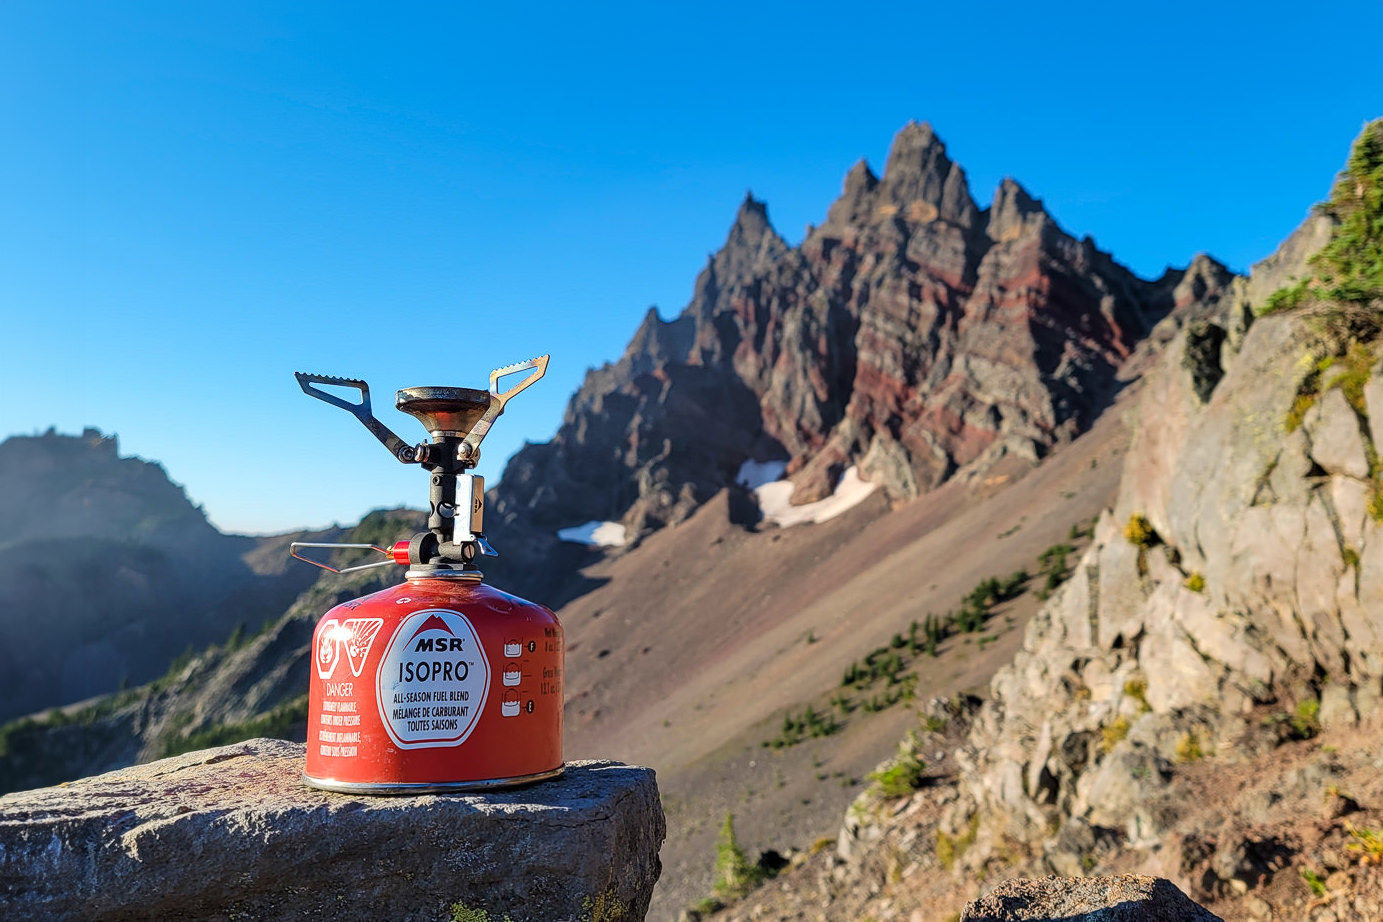 The MSR Pocket Rocket Deluxe backpacking stove in front of a jagged mountain with red bands